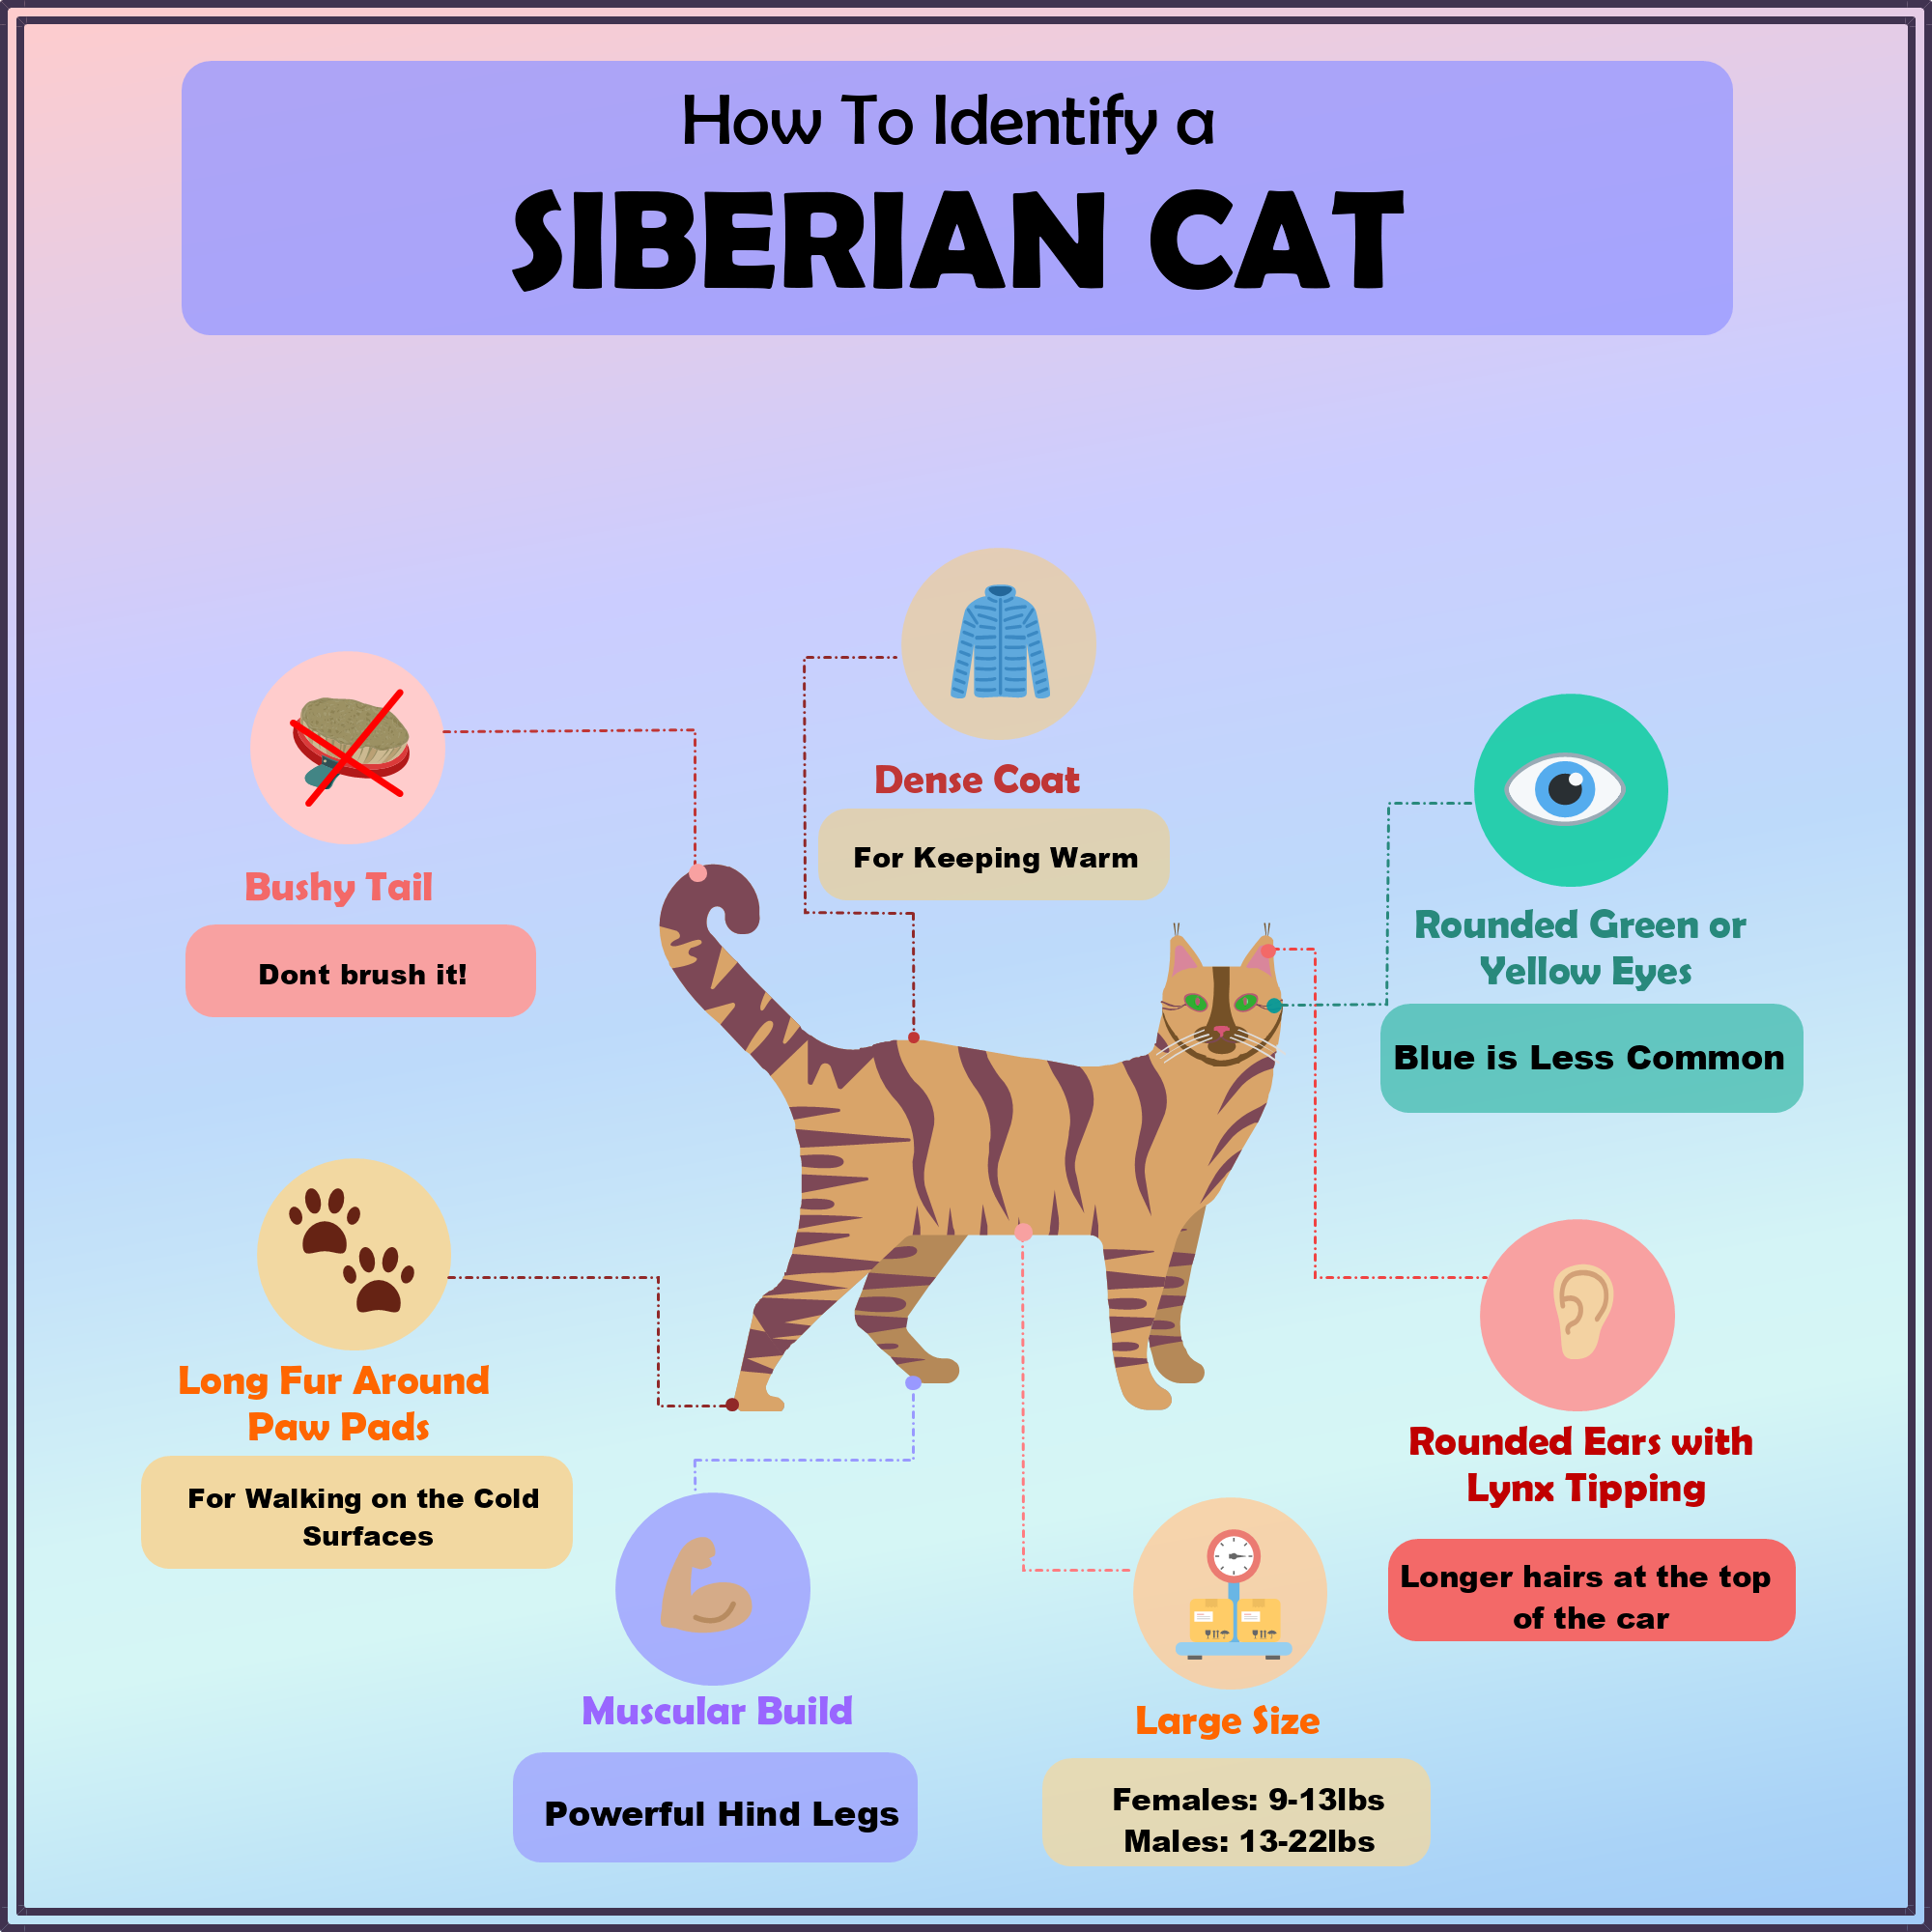 How to Identify A Siberian Cat